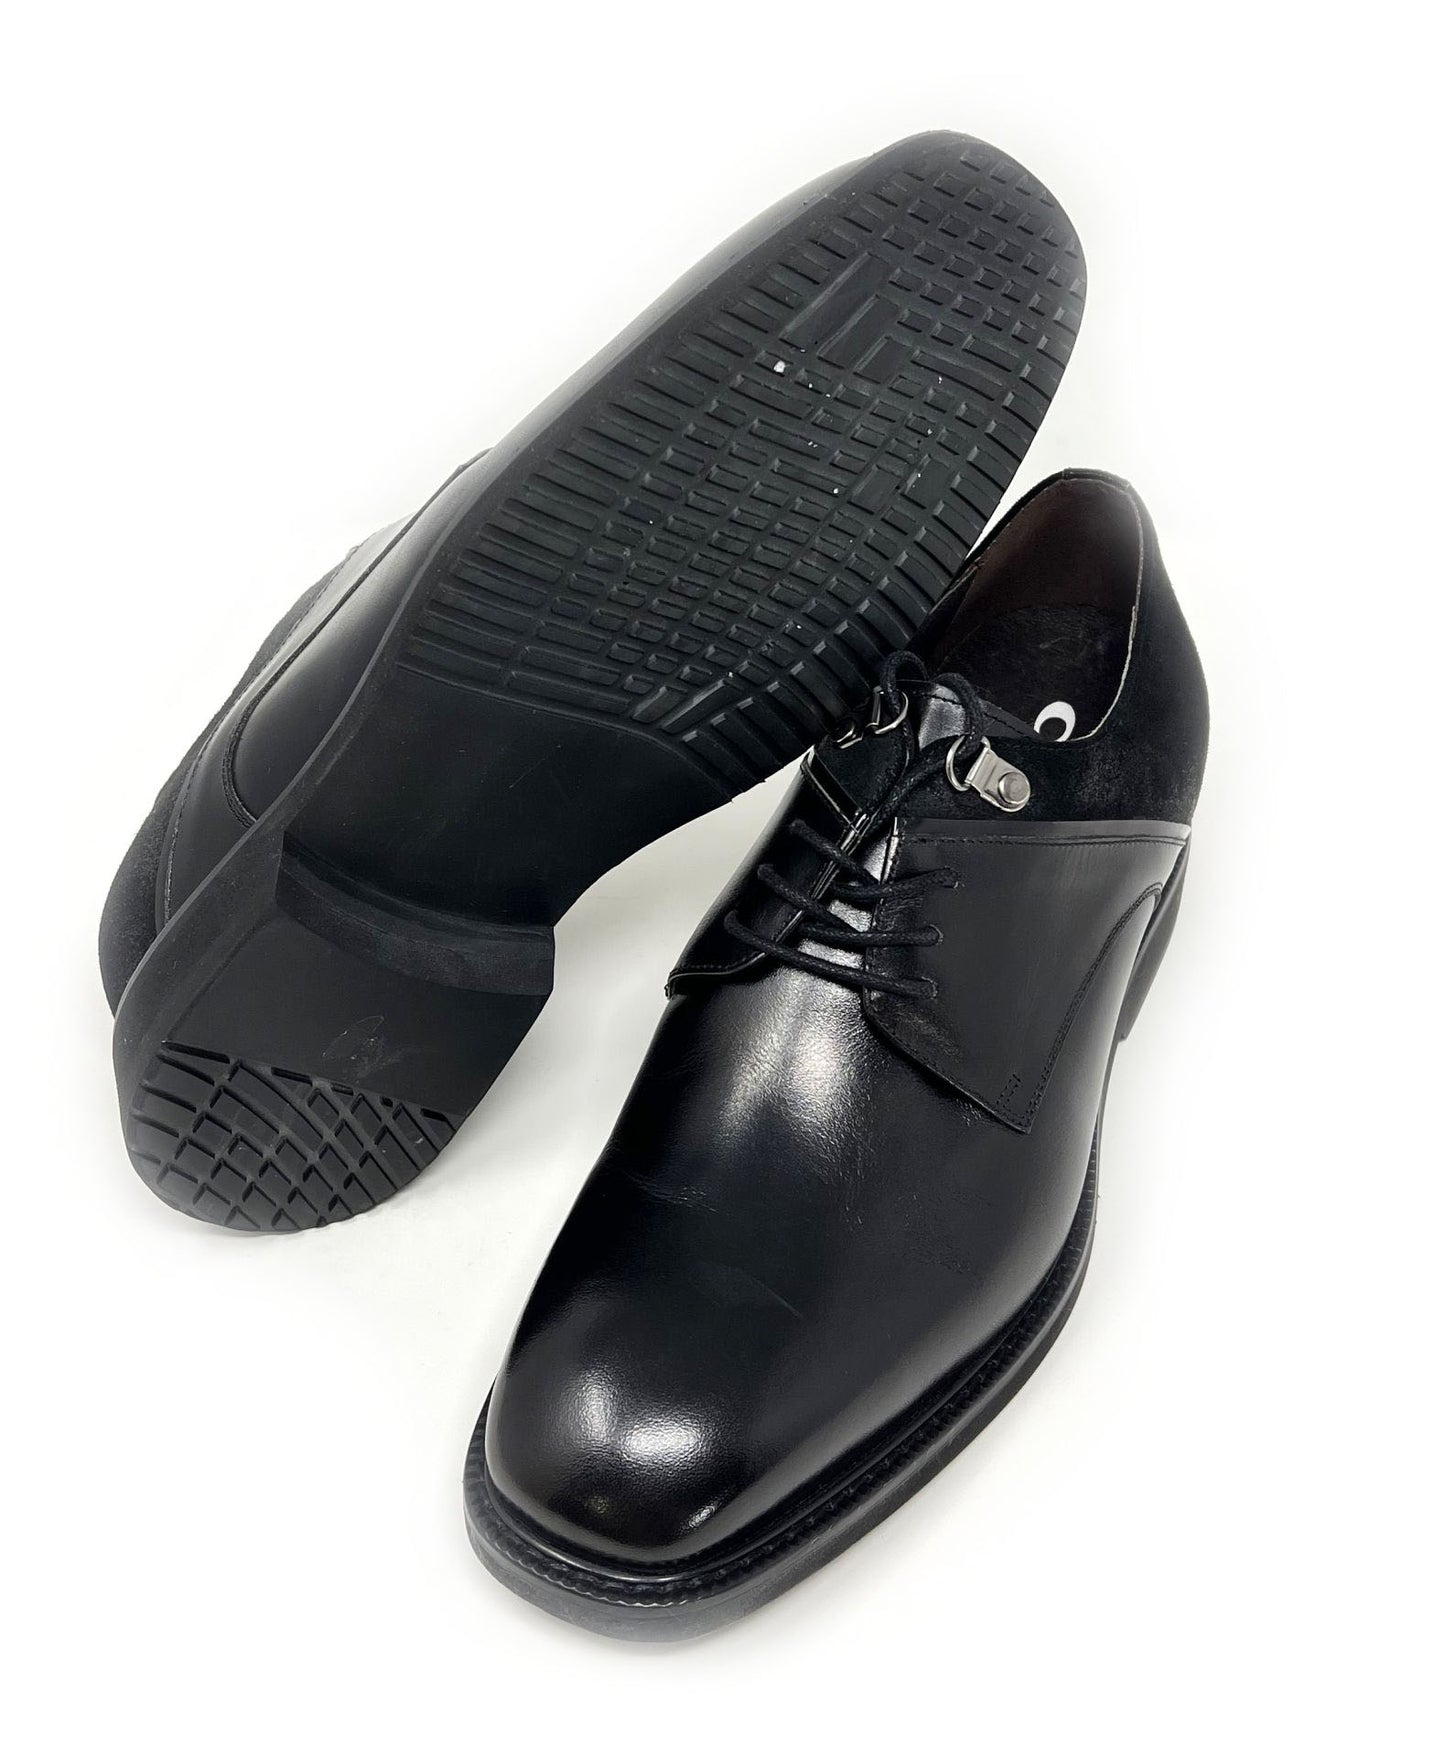 Elevator shoes height increase FSM0040 - 3.2 Inches Taller (Black) - Size 7.5 Only